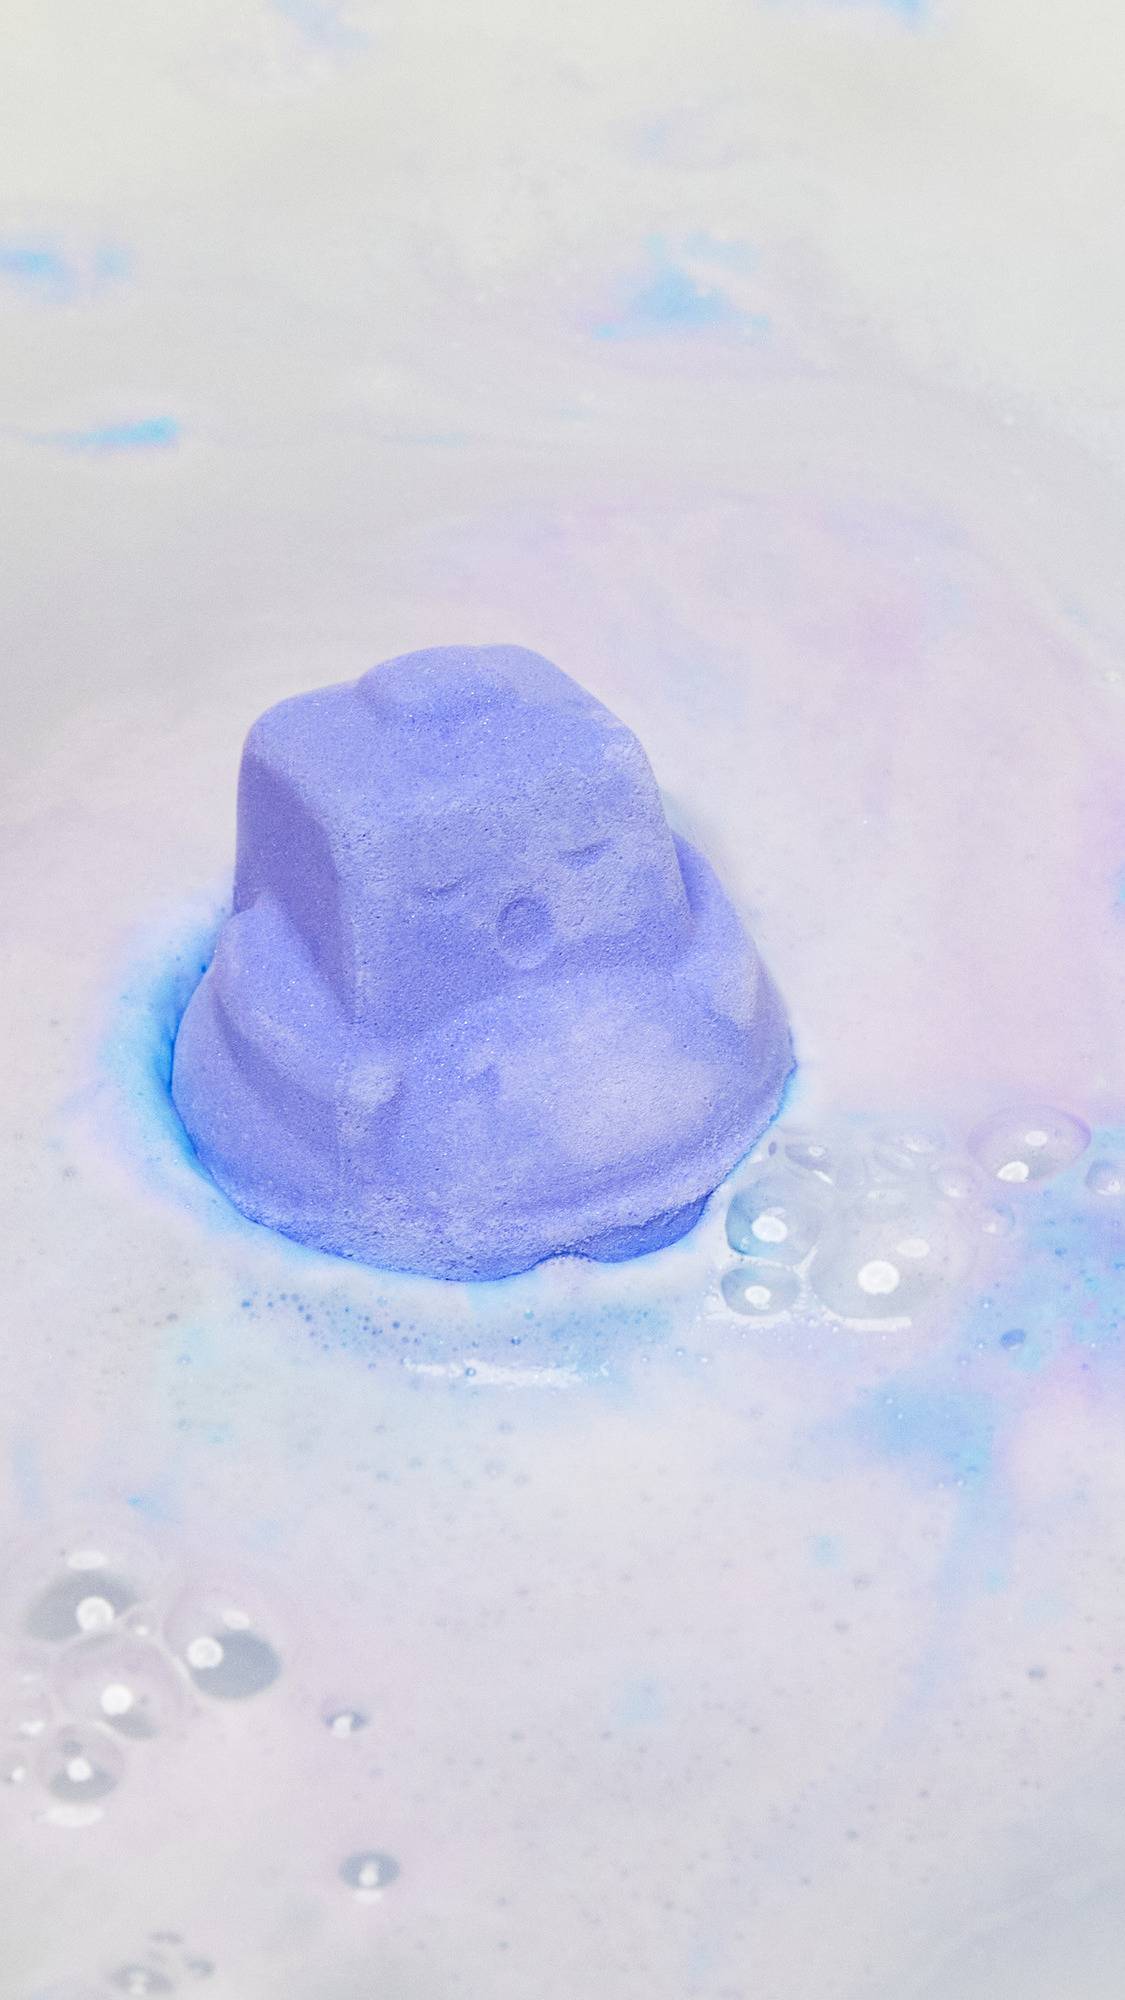 The Sleepy Bot bath bomb has been gently placed into the bath water and is beginning to give off subtle lavender foam.